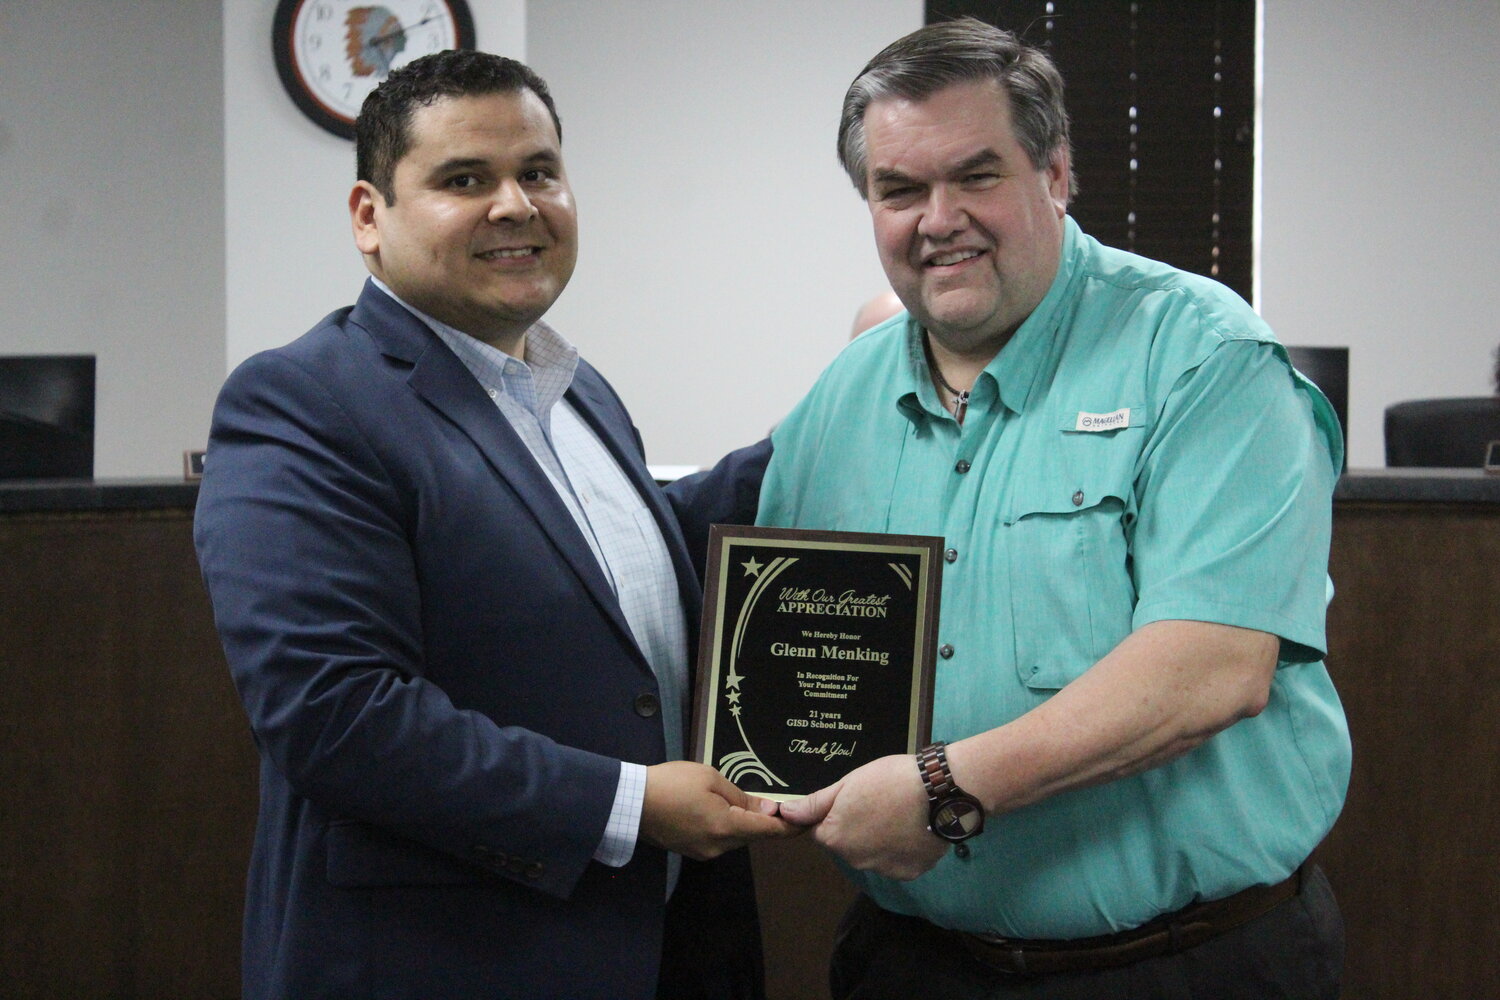 Gonzales Superintendent Dr. Elmer Avellaneda presents a plaque to outgoing school board member Glenn Menking for his 21 years of service on the school board. Menking served with six superintendents and more than 15 school board members during his 21 years on the board.